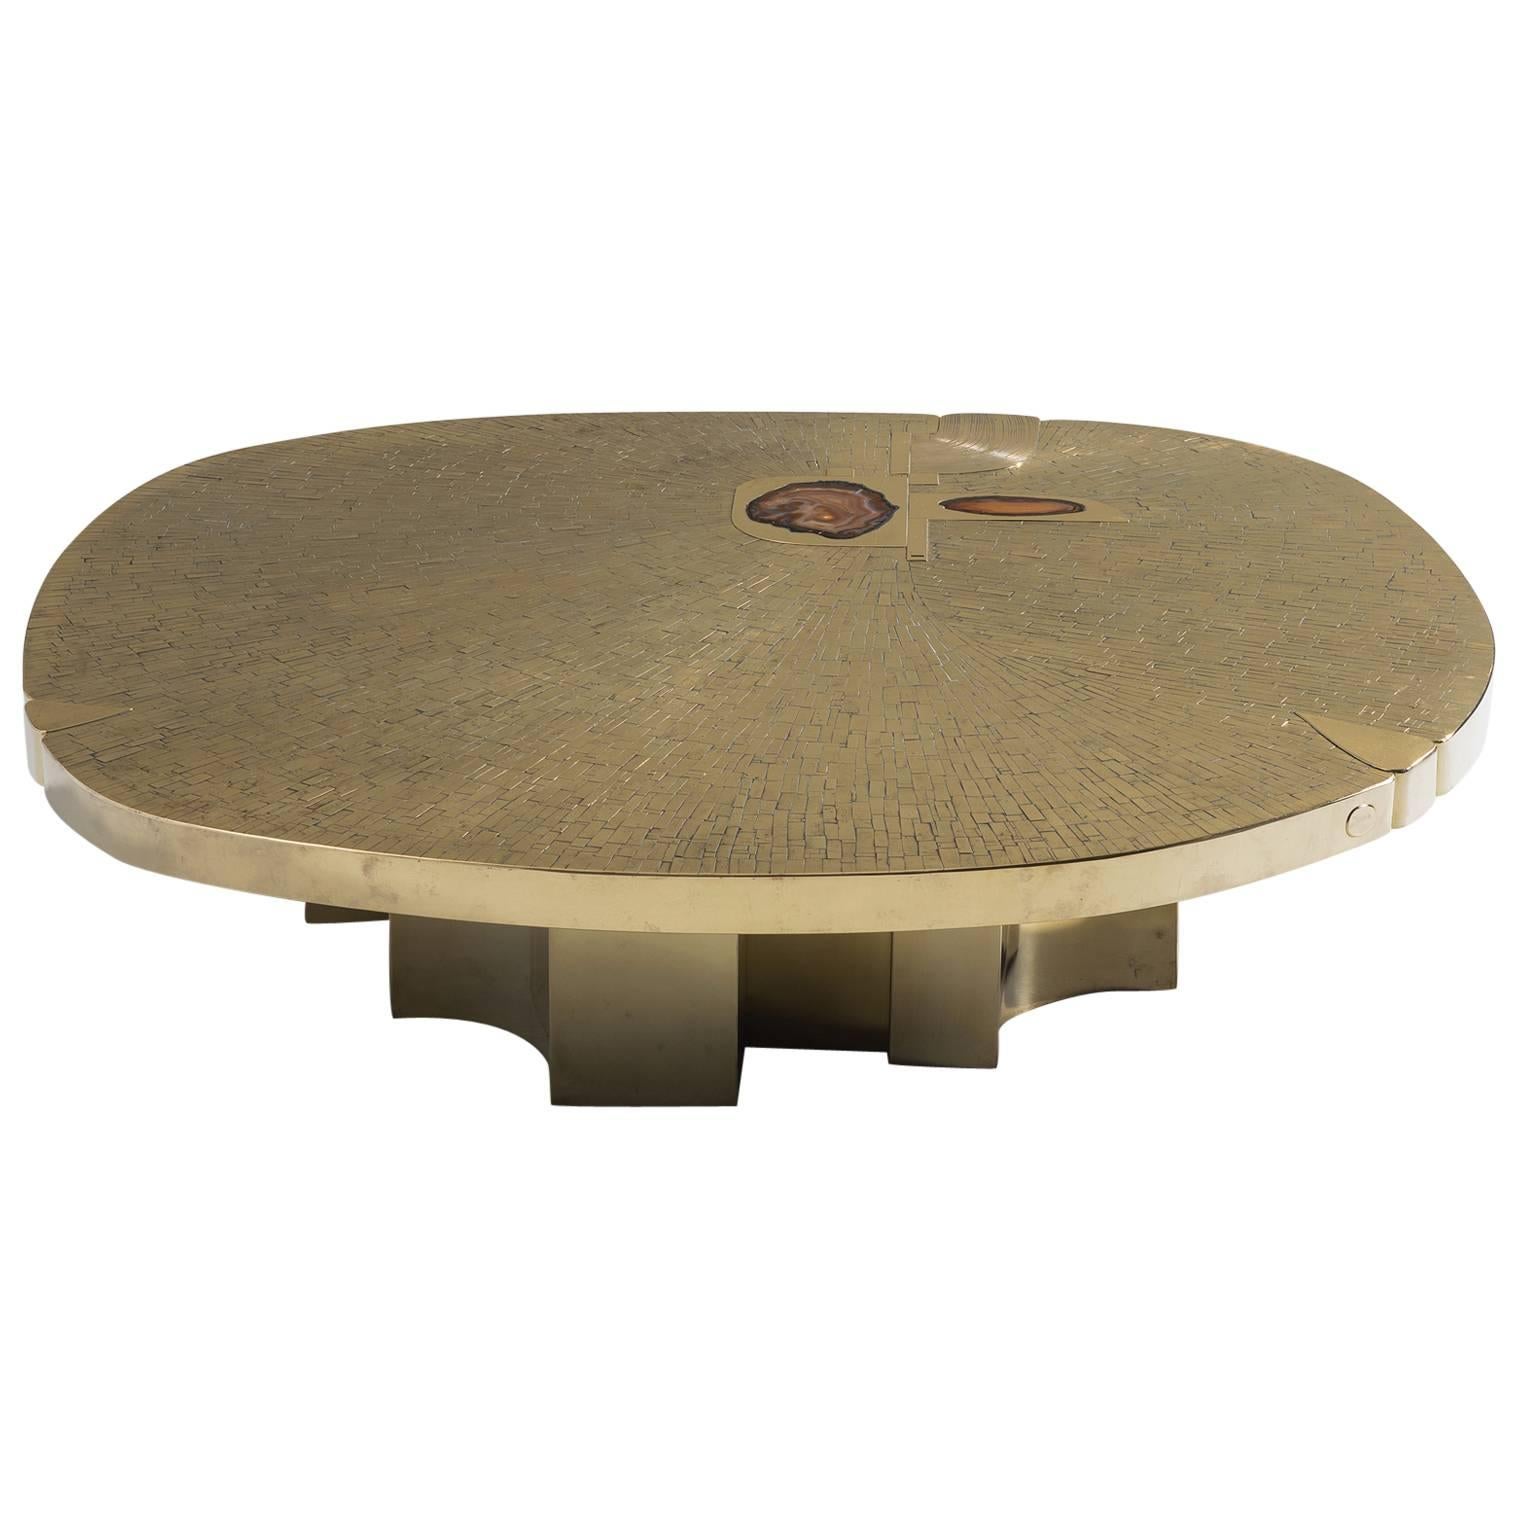 Jean Claude Dresse Brass Coffee Table with Agate Stones